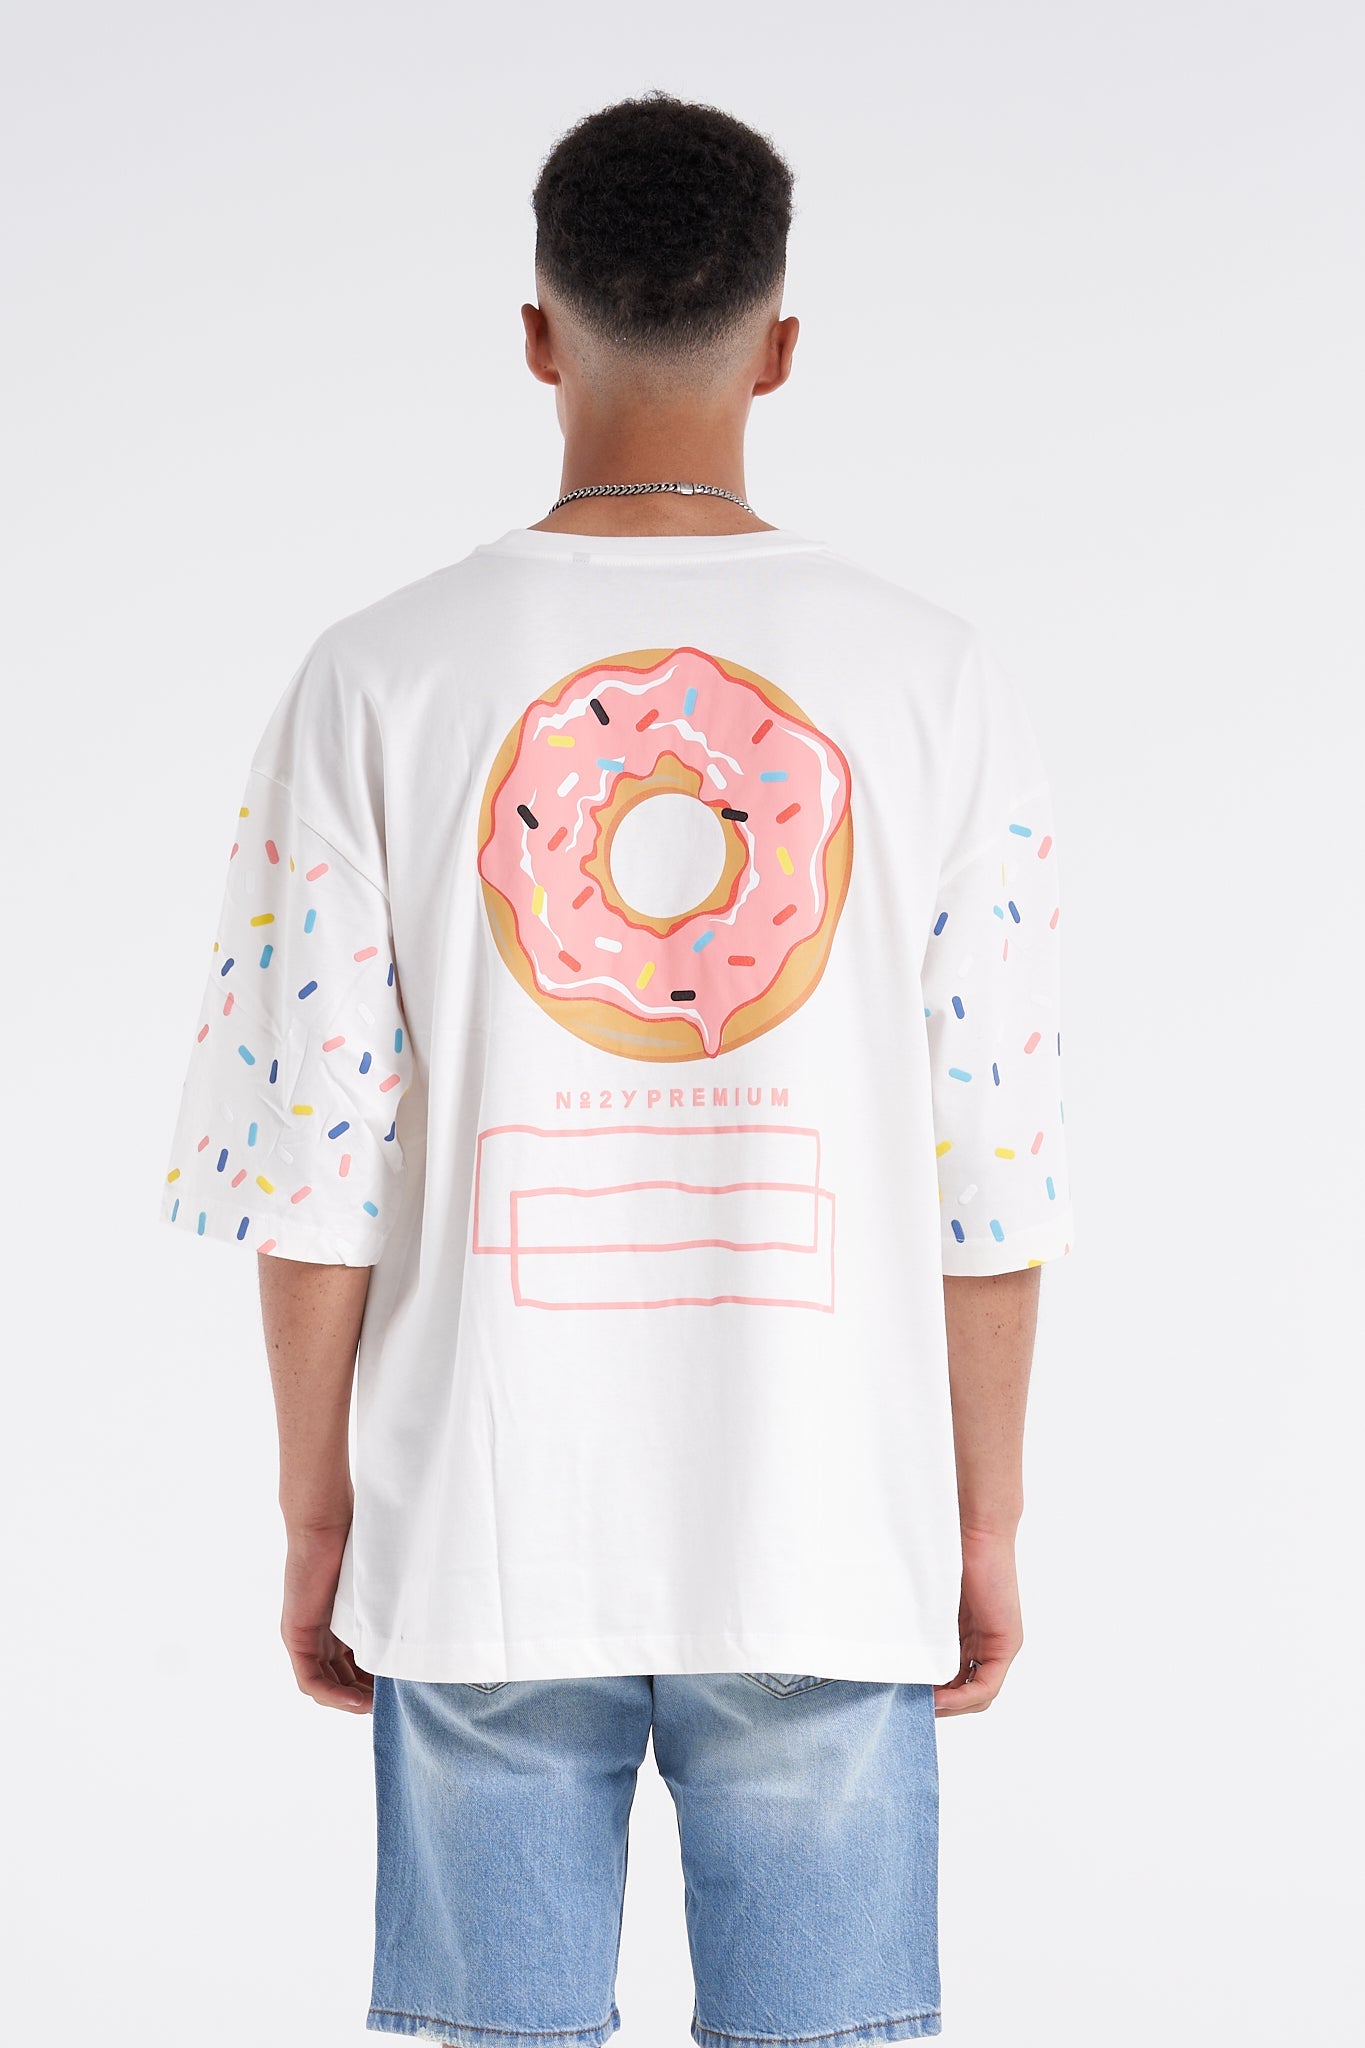 Sprinkle Donut Oversized Tee White - UNEFFECTED STUDIOS® - Shirts & Tops - UNEFFECTED STUDIOS®